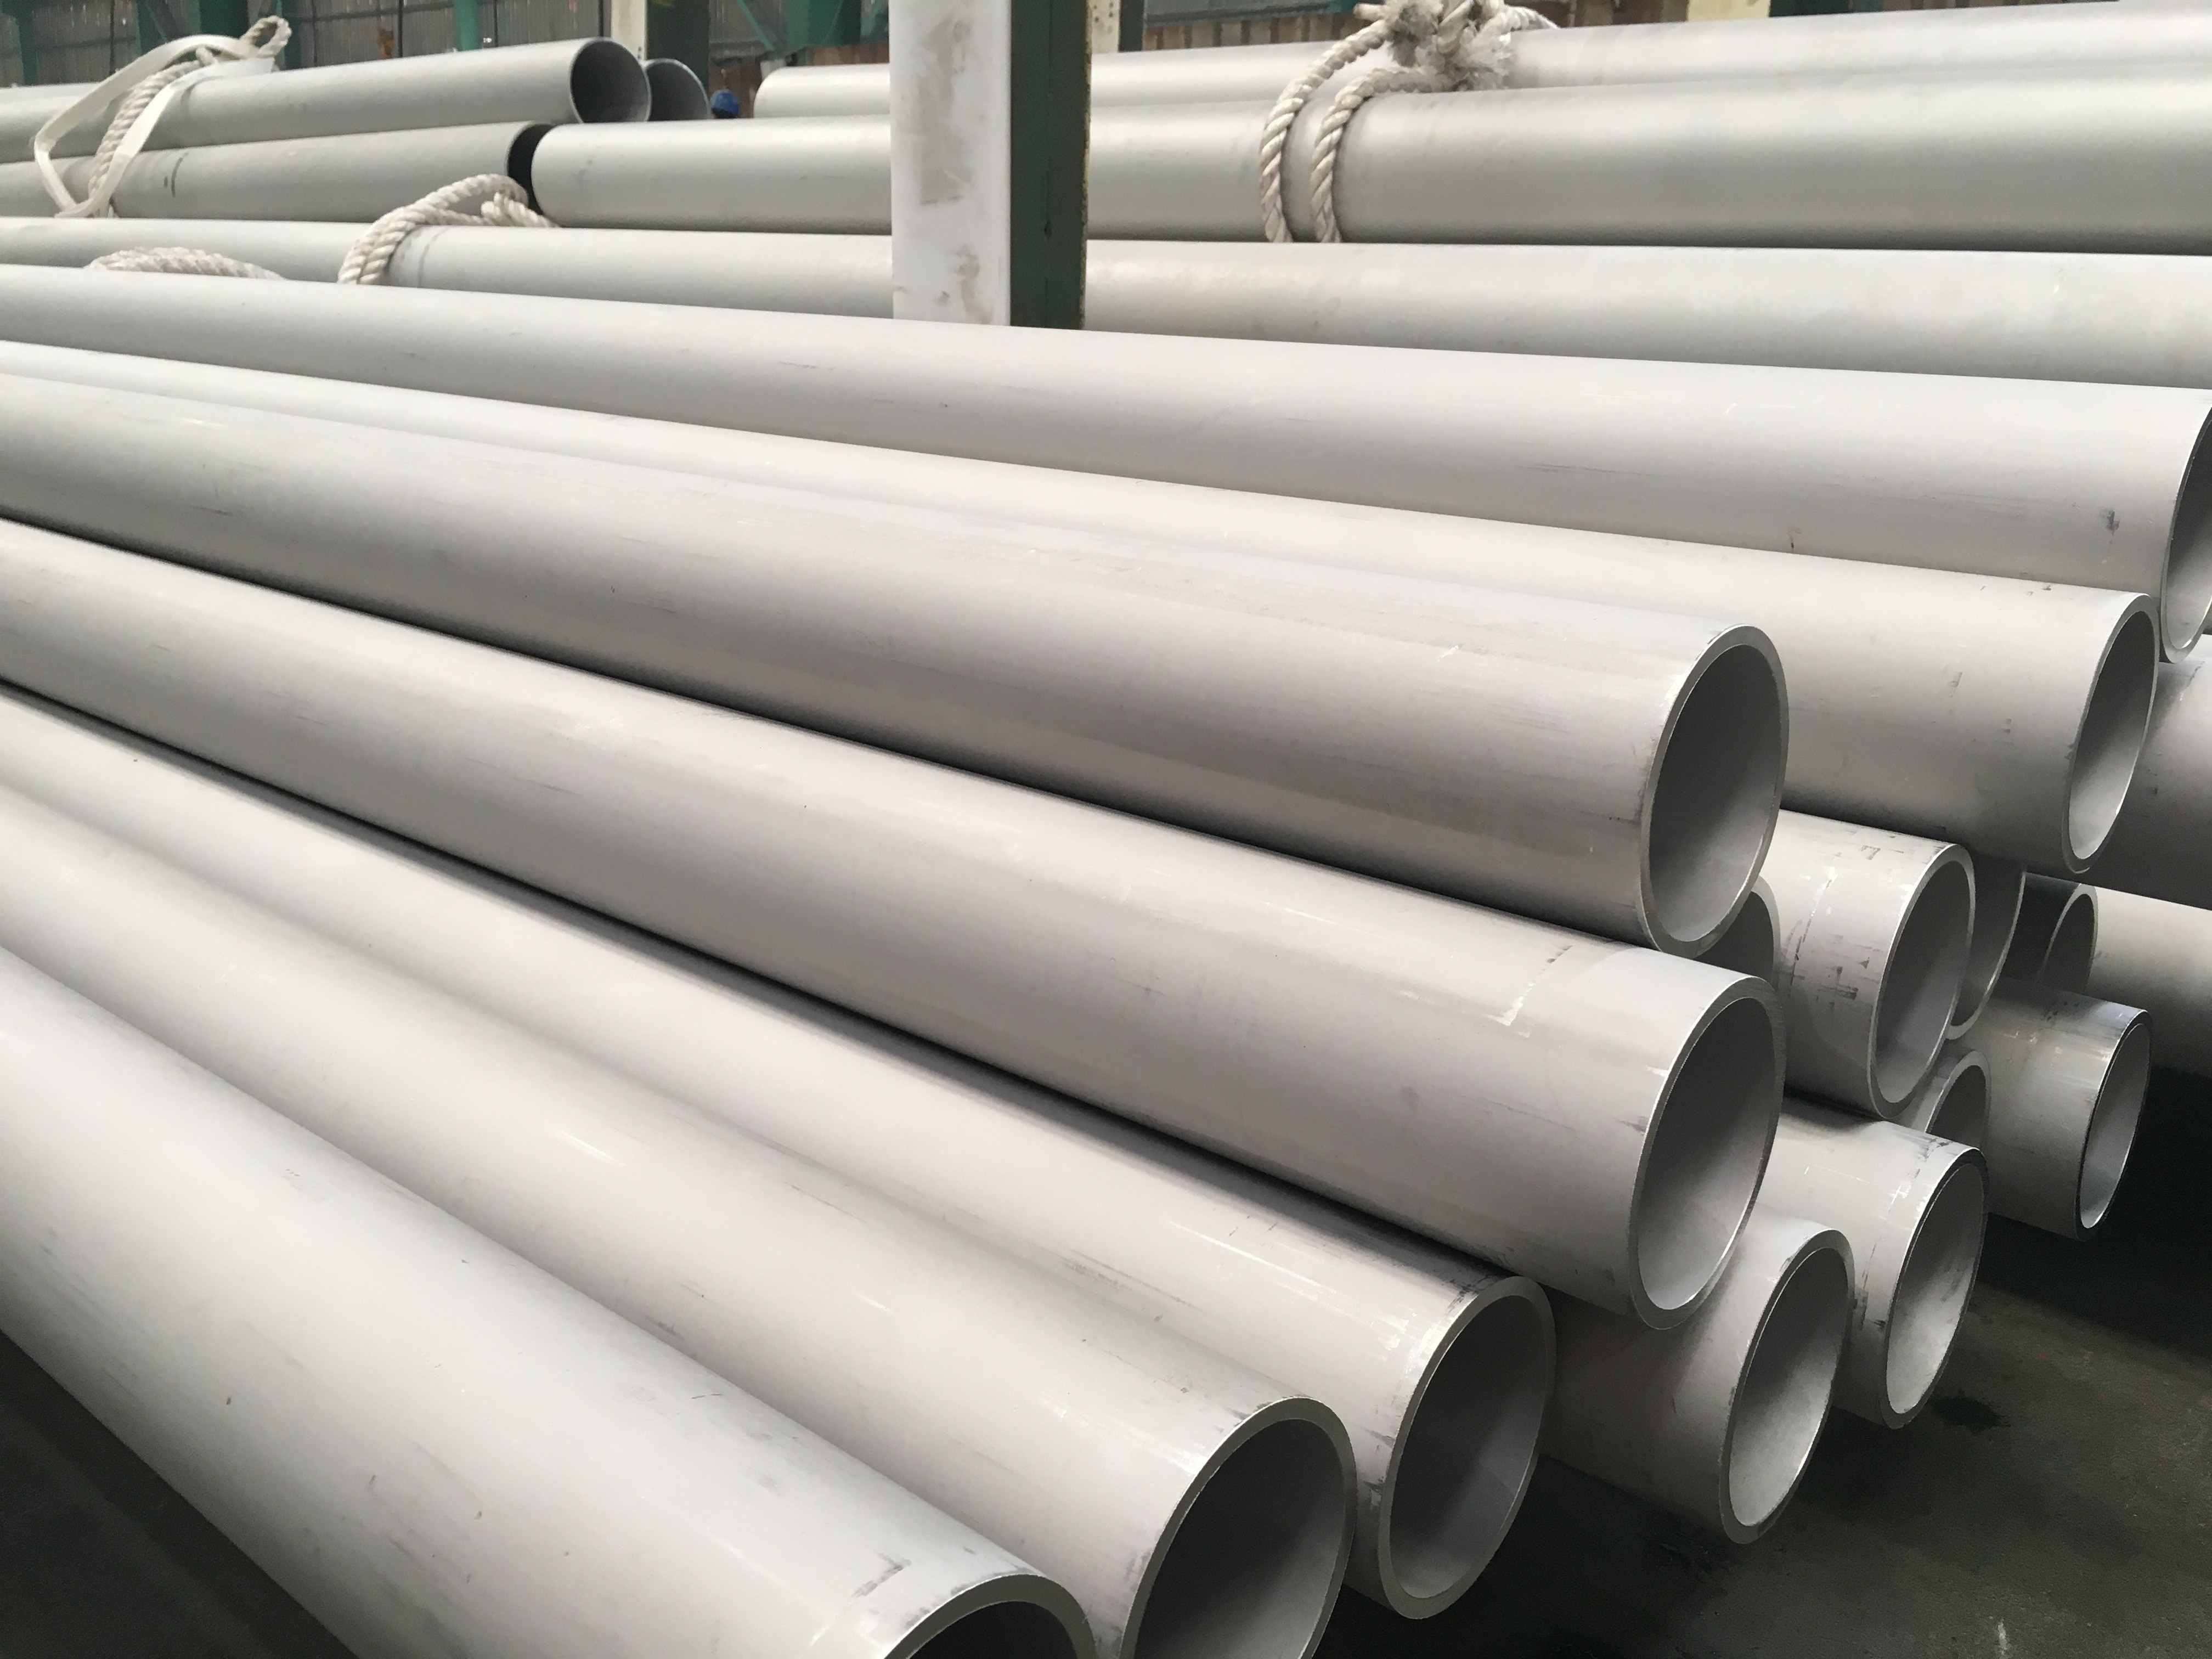 China Stainless Steel Seamless Pipe, ASTM A312 TP316Ti , B16.10 & B16.19, 6M ,PE / BE,